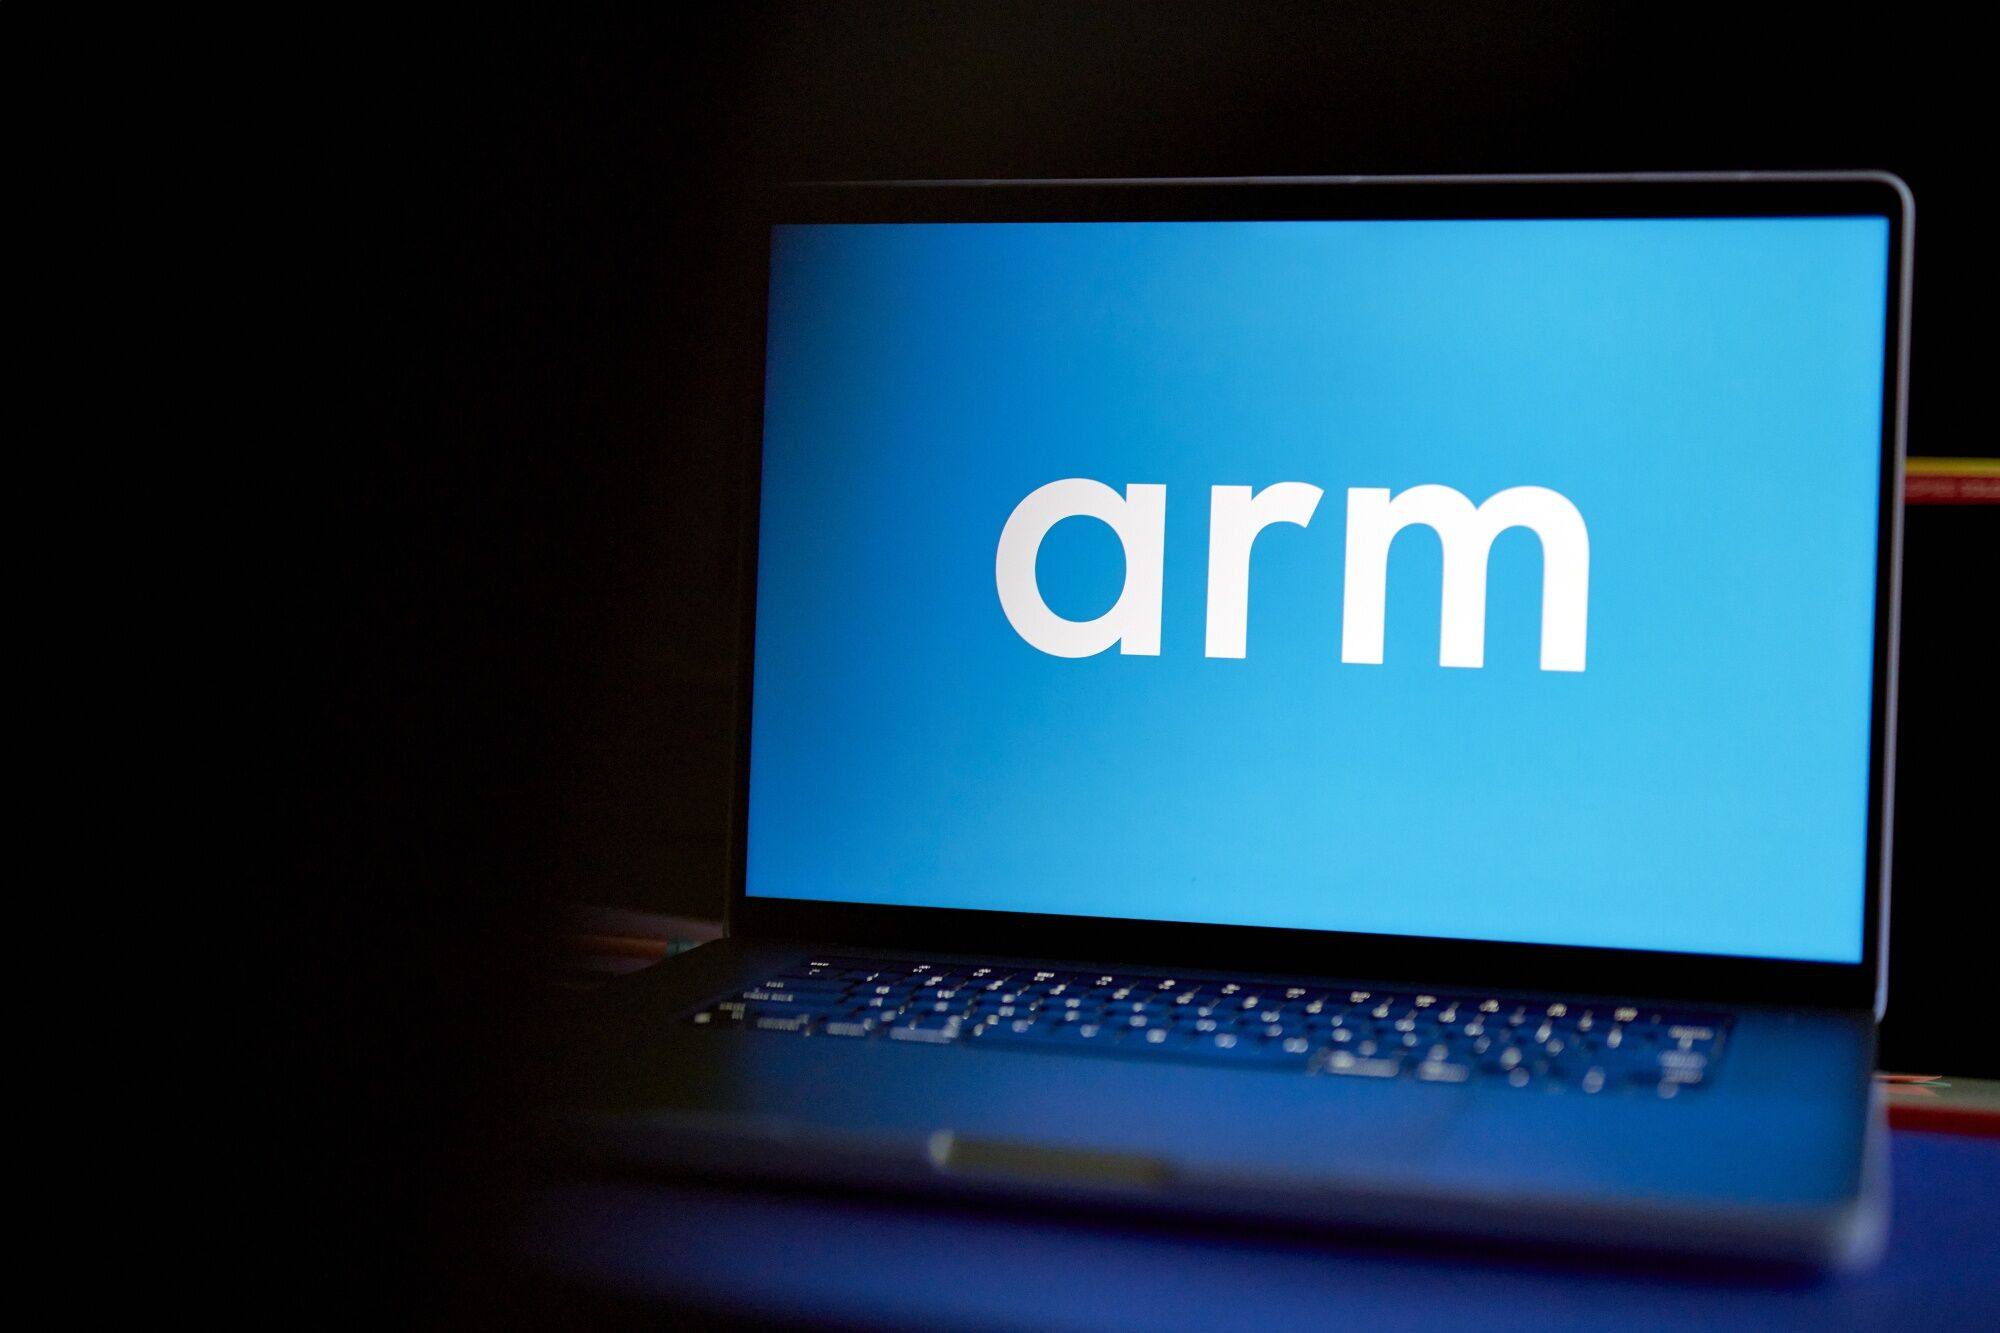 Arm’s IPO could yield a lower valuation than previously thought as it faces risks from its exposure to China. Photo: Bloomberg